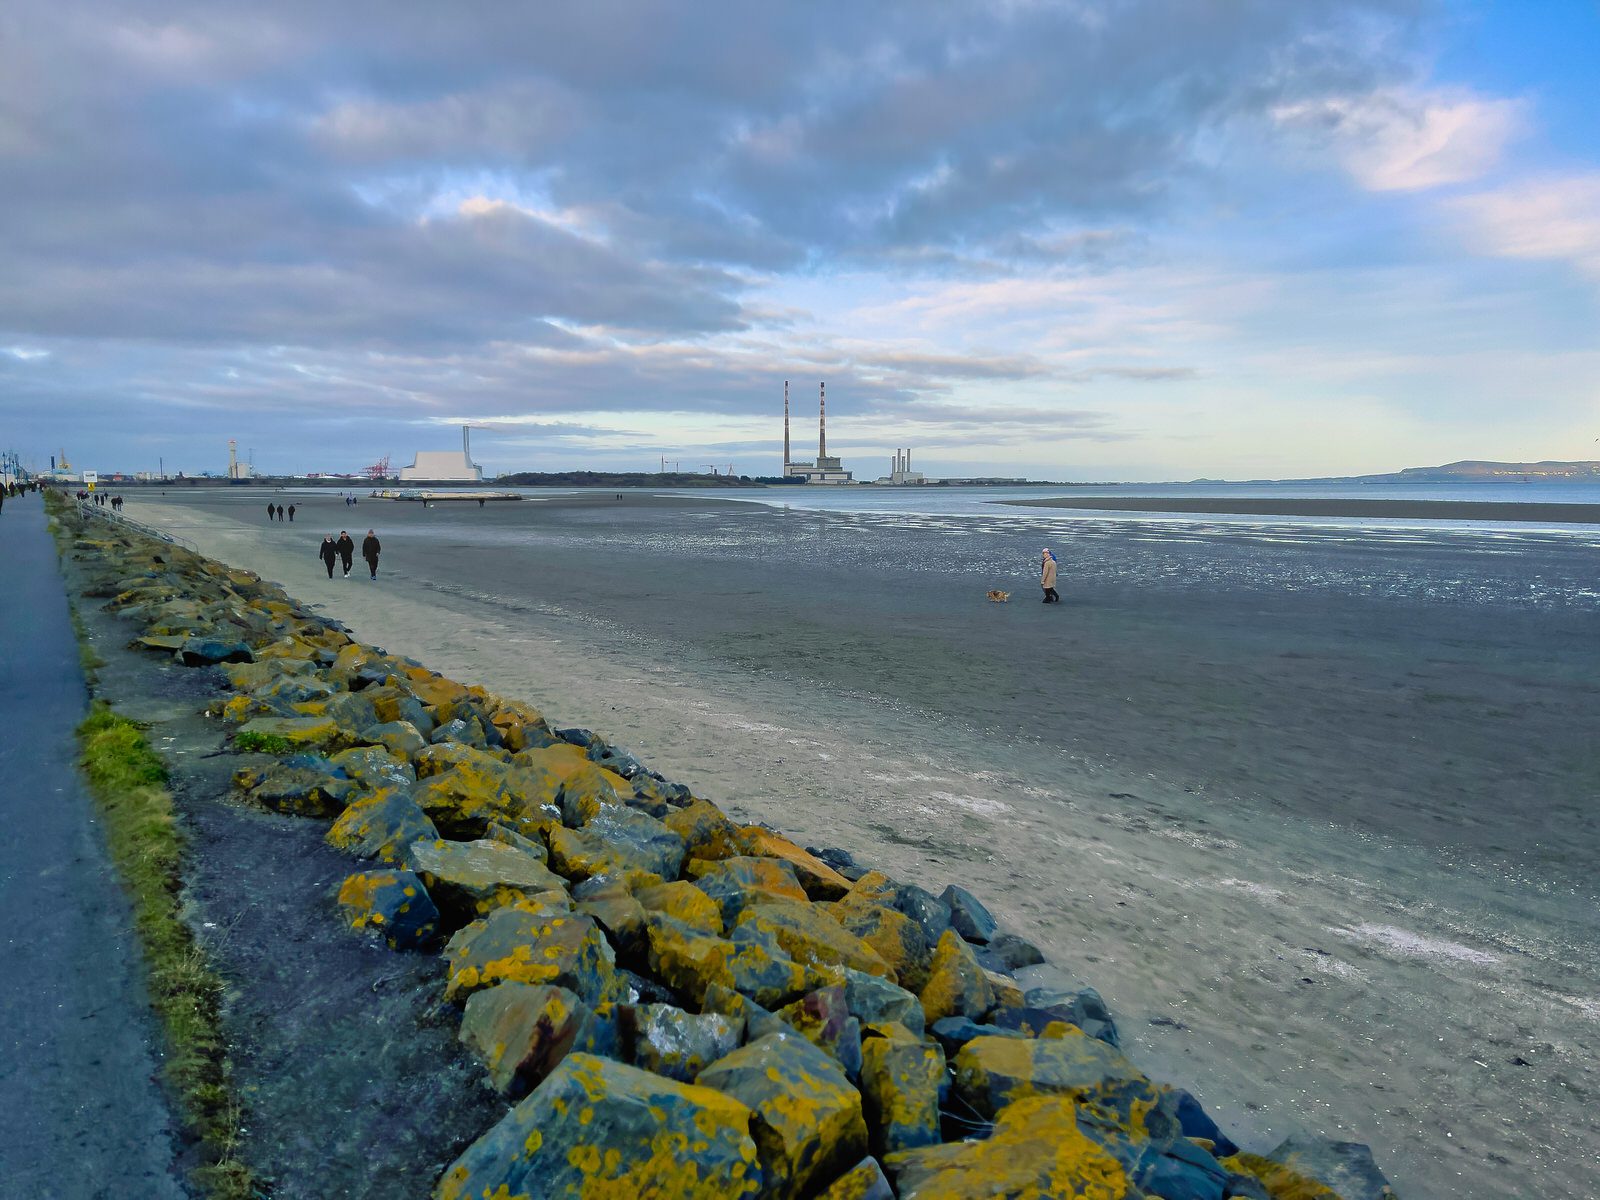 STRAND ROAD IN SANDYMOUNT PHOTOGRAPHED 29 JANUARY 2023